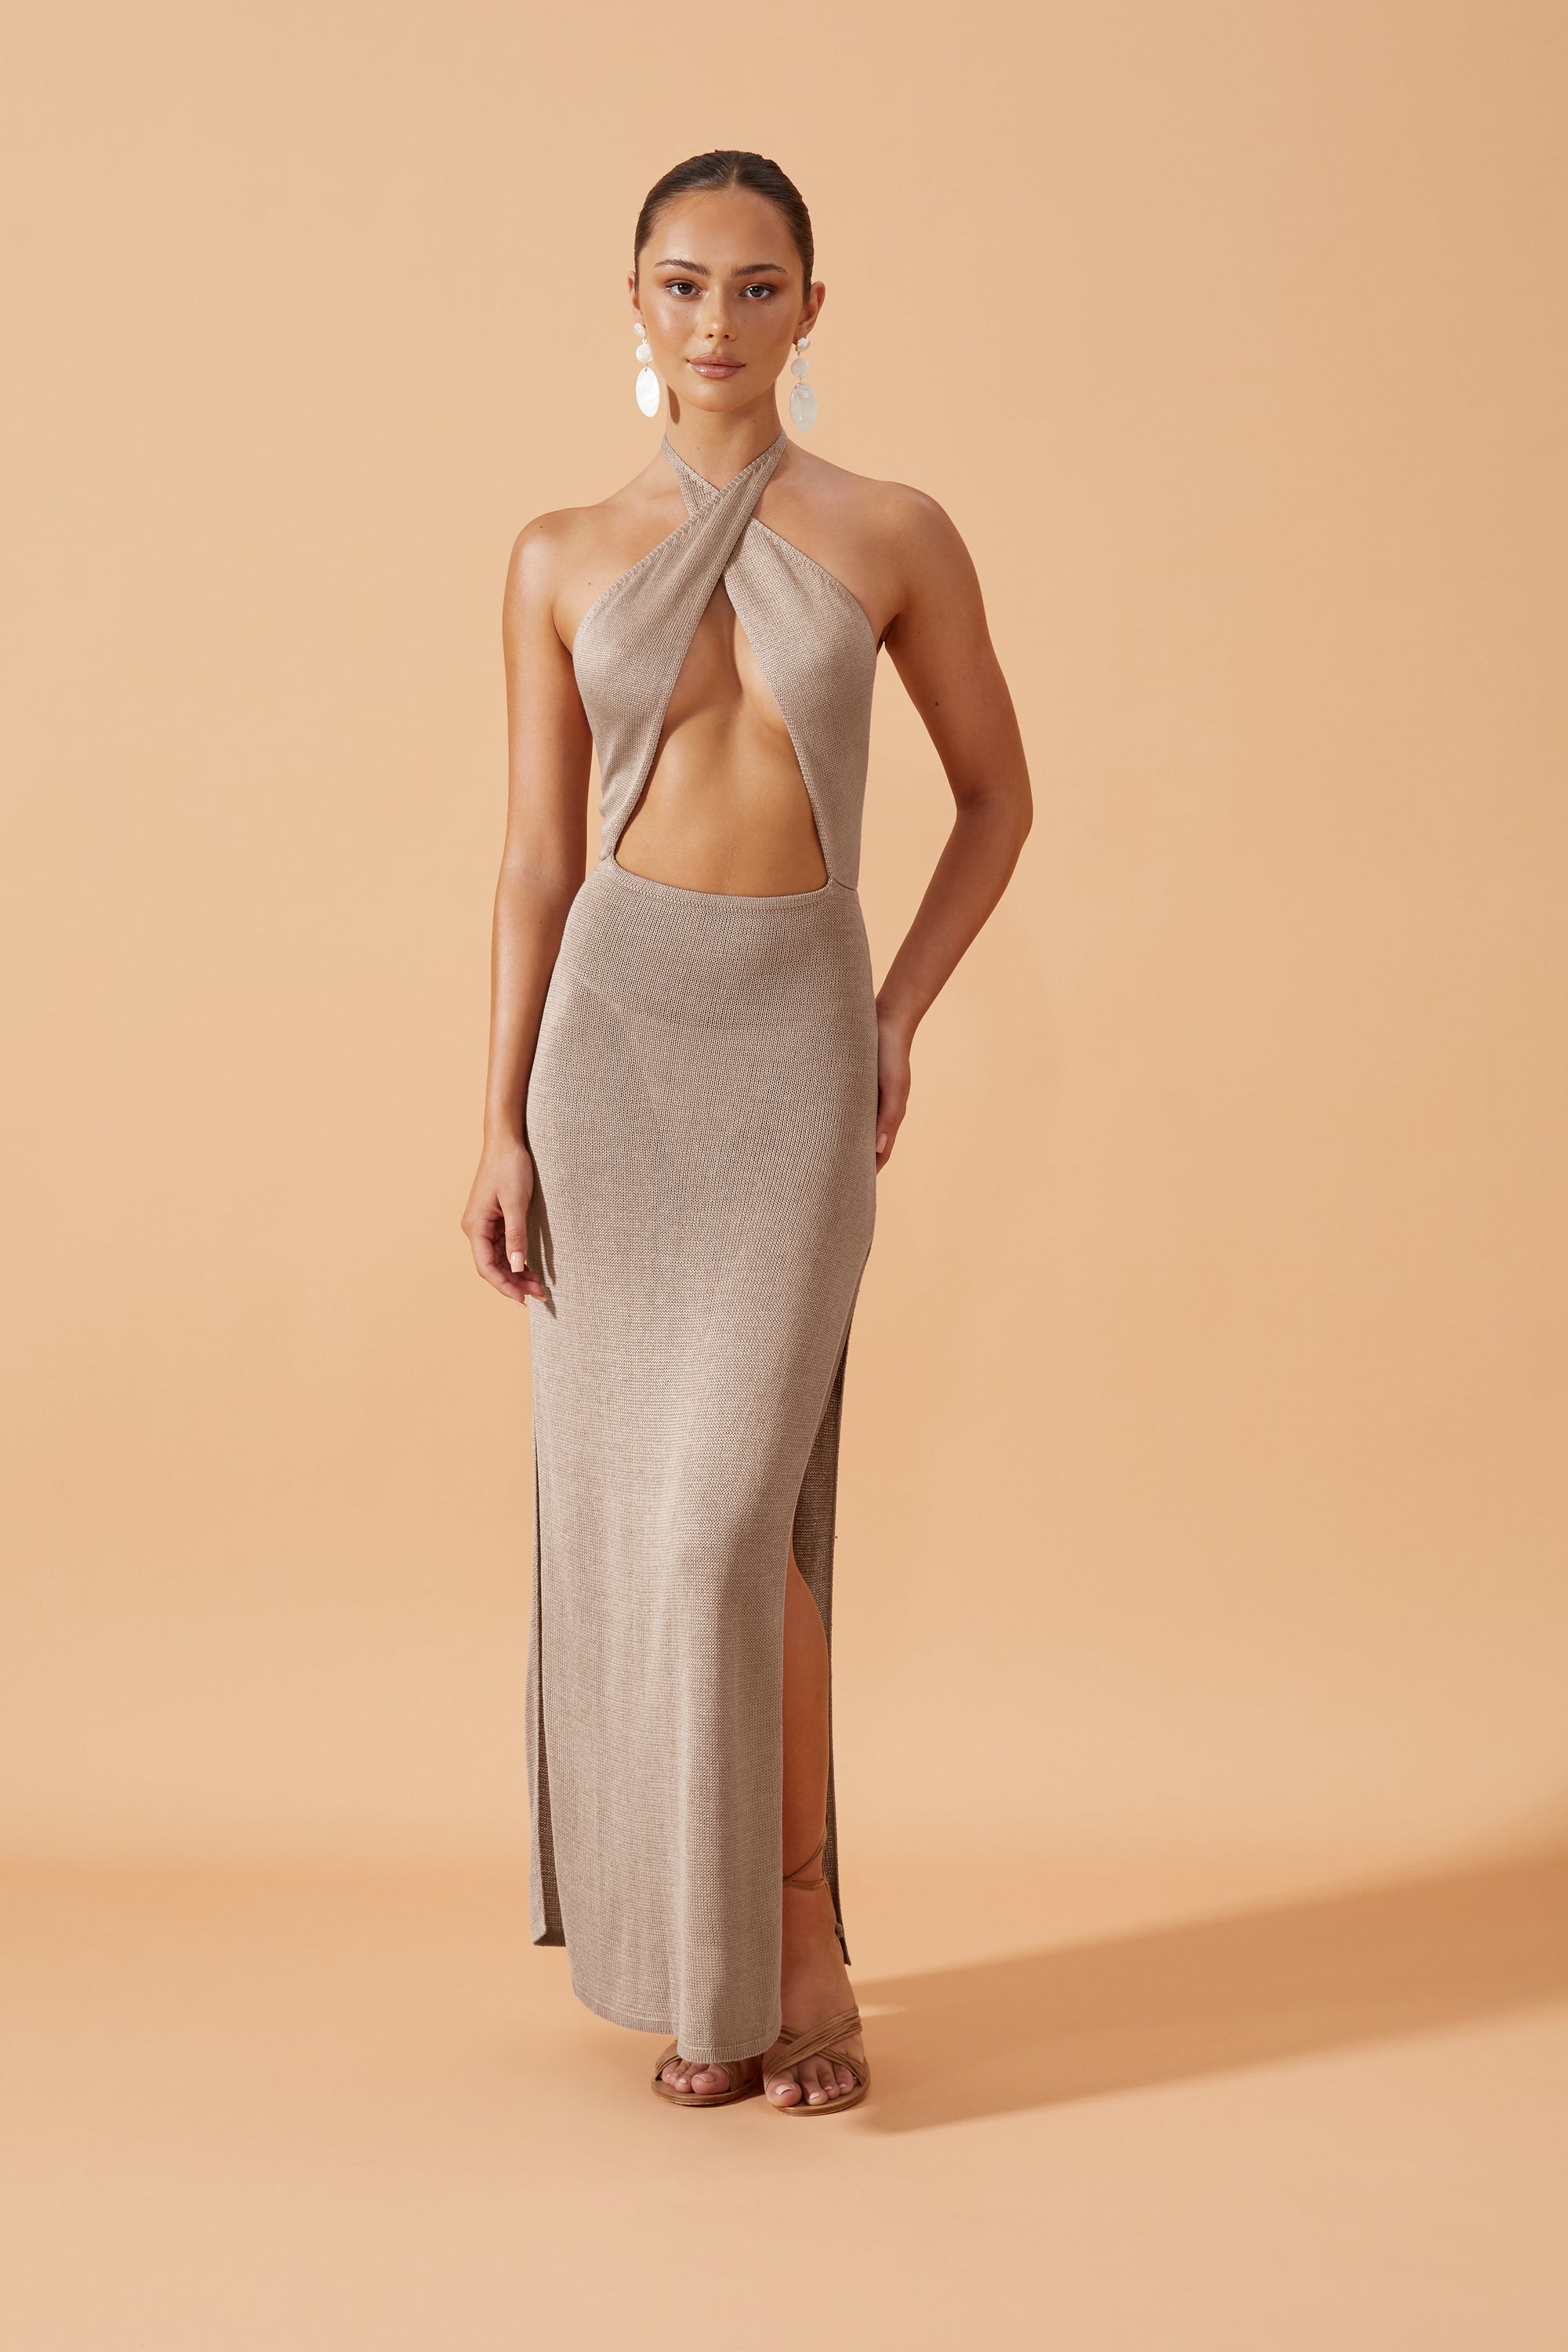 Flook The Label Lua Knit Long Dress in Taupe. Open front crossed at the neck and slits on both sides. Front View